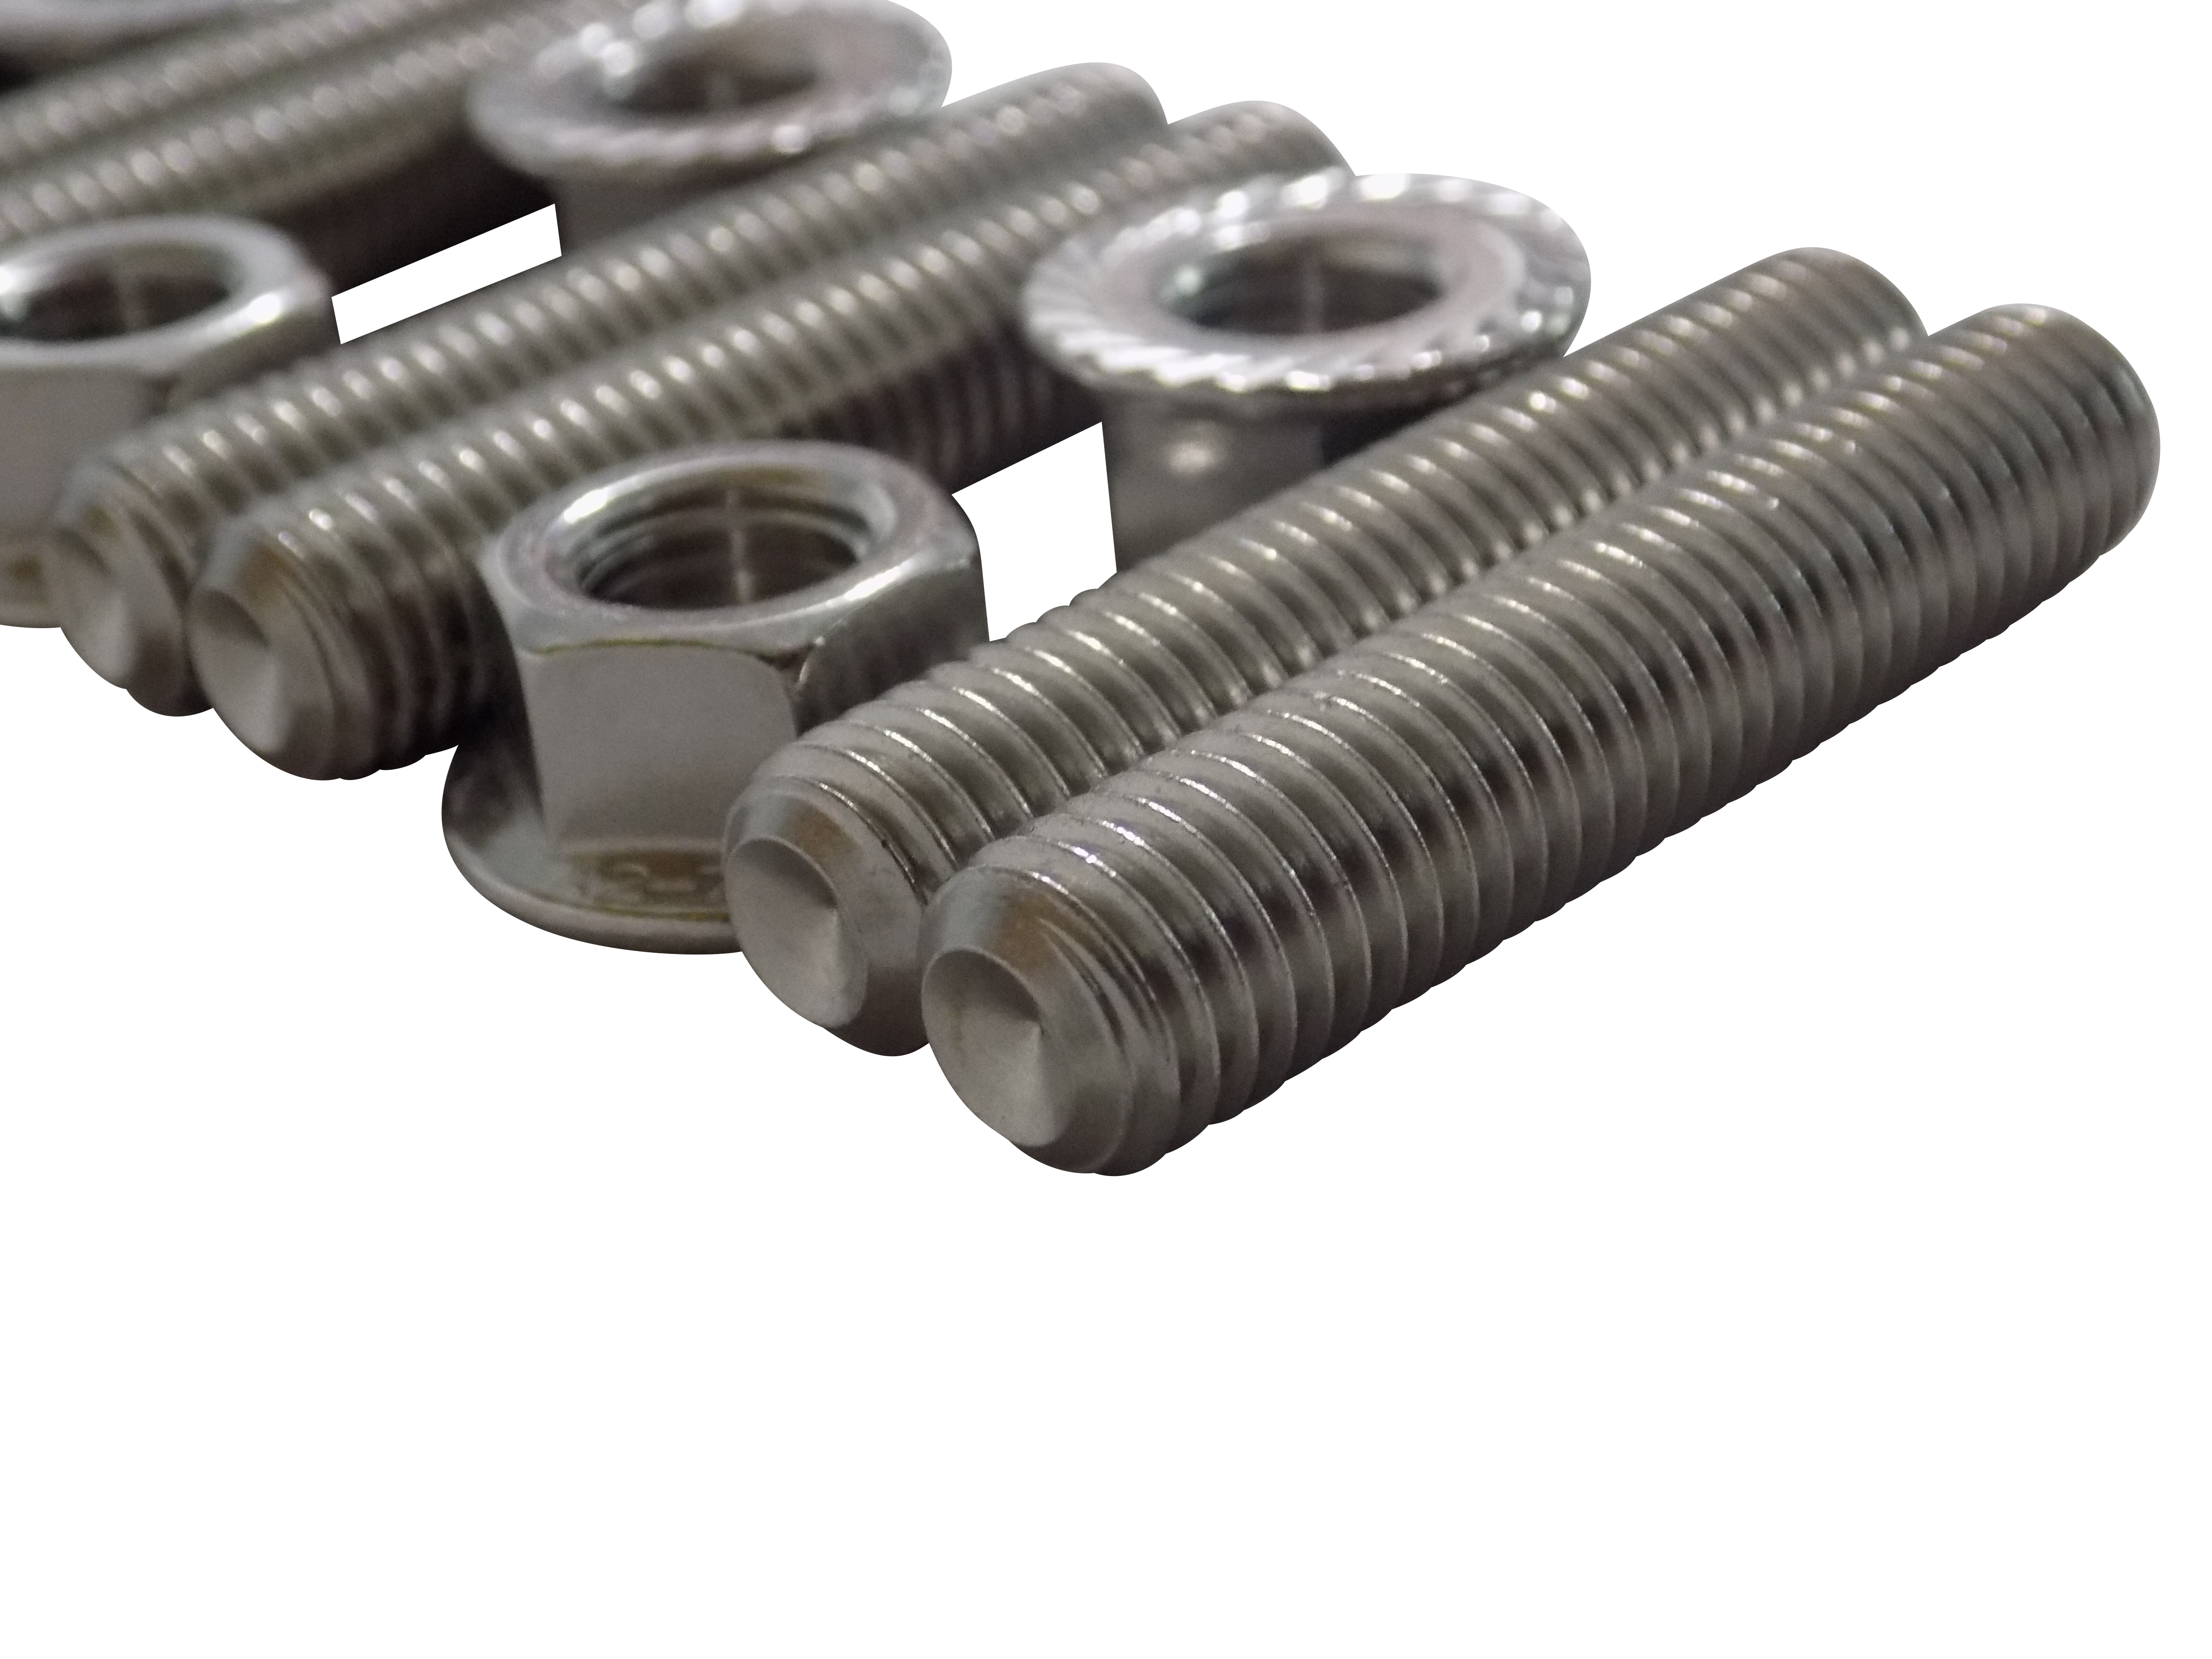 Exhaust Manifold Stainless Stud Kit for 1989-2019 5.9l & 6.7l Cummins